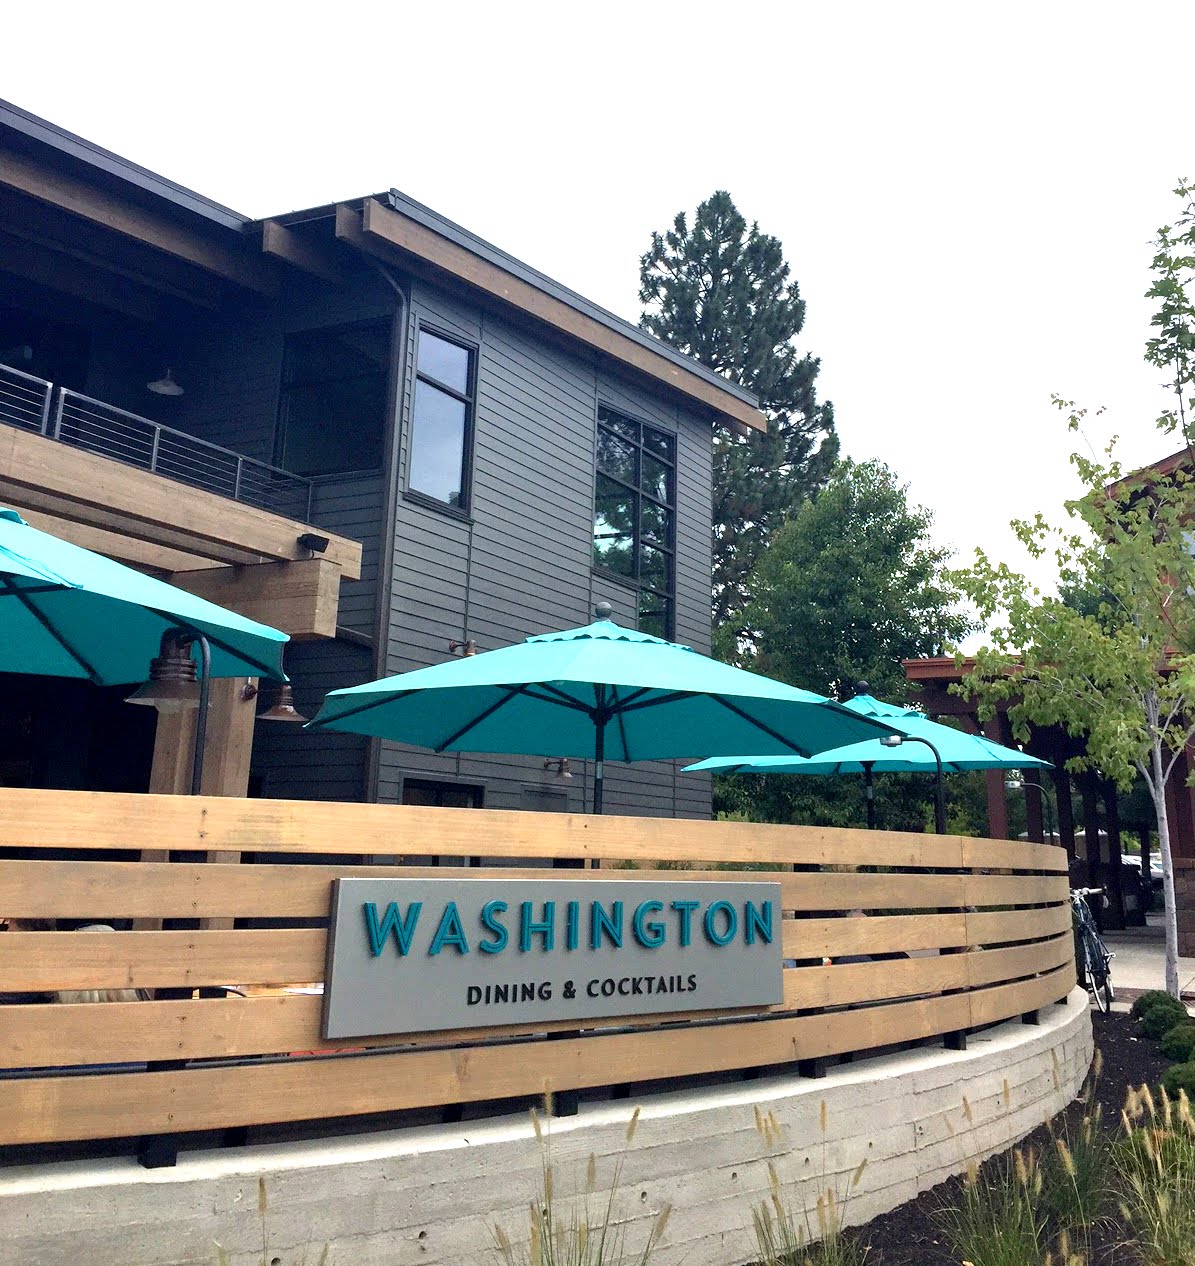 A New Restaurant in Town: Washington Dining & Cocktails